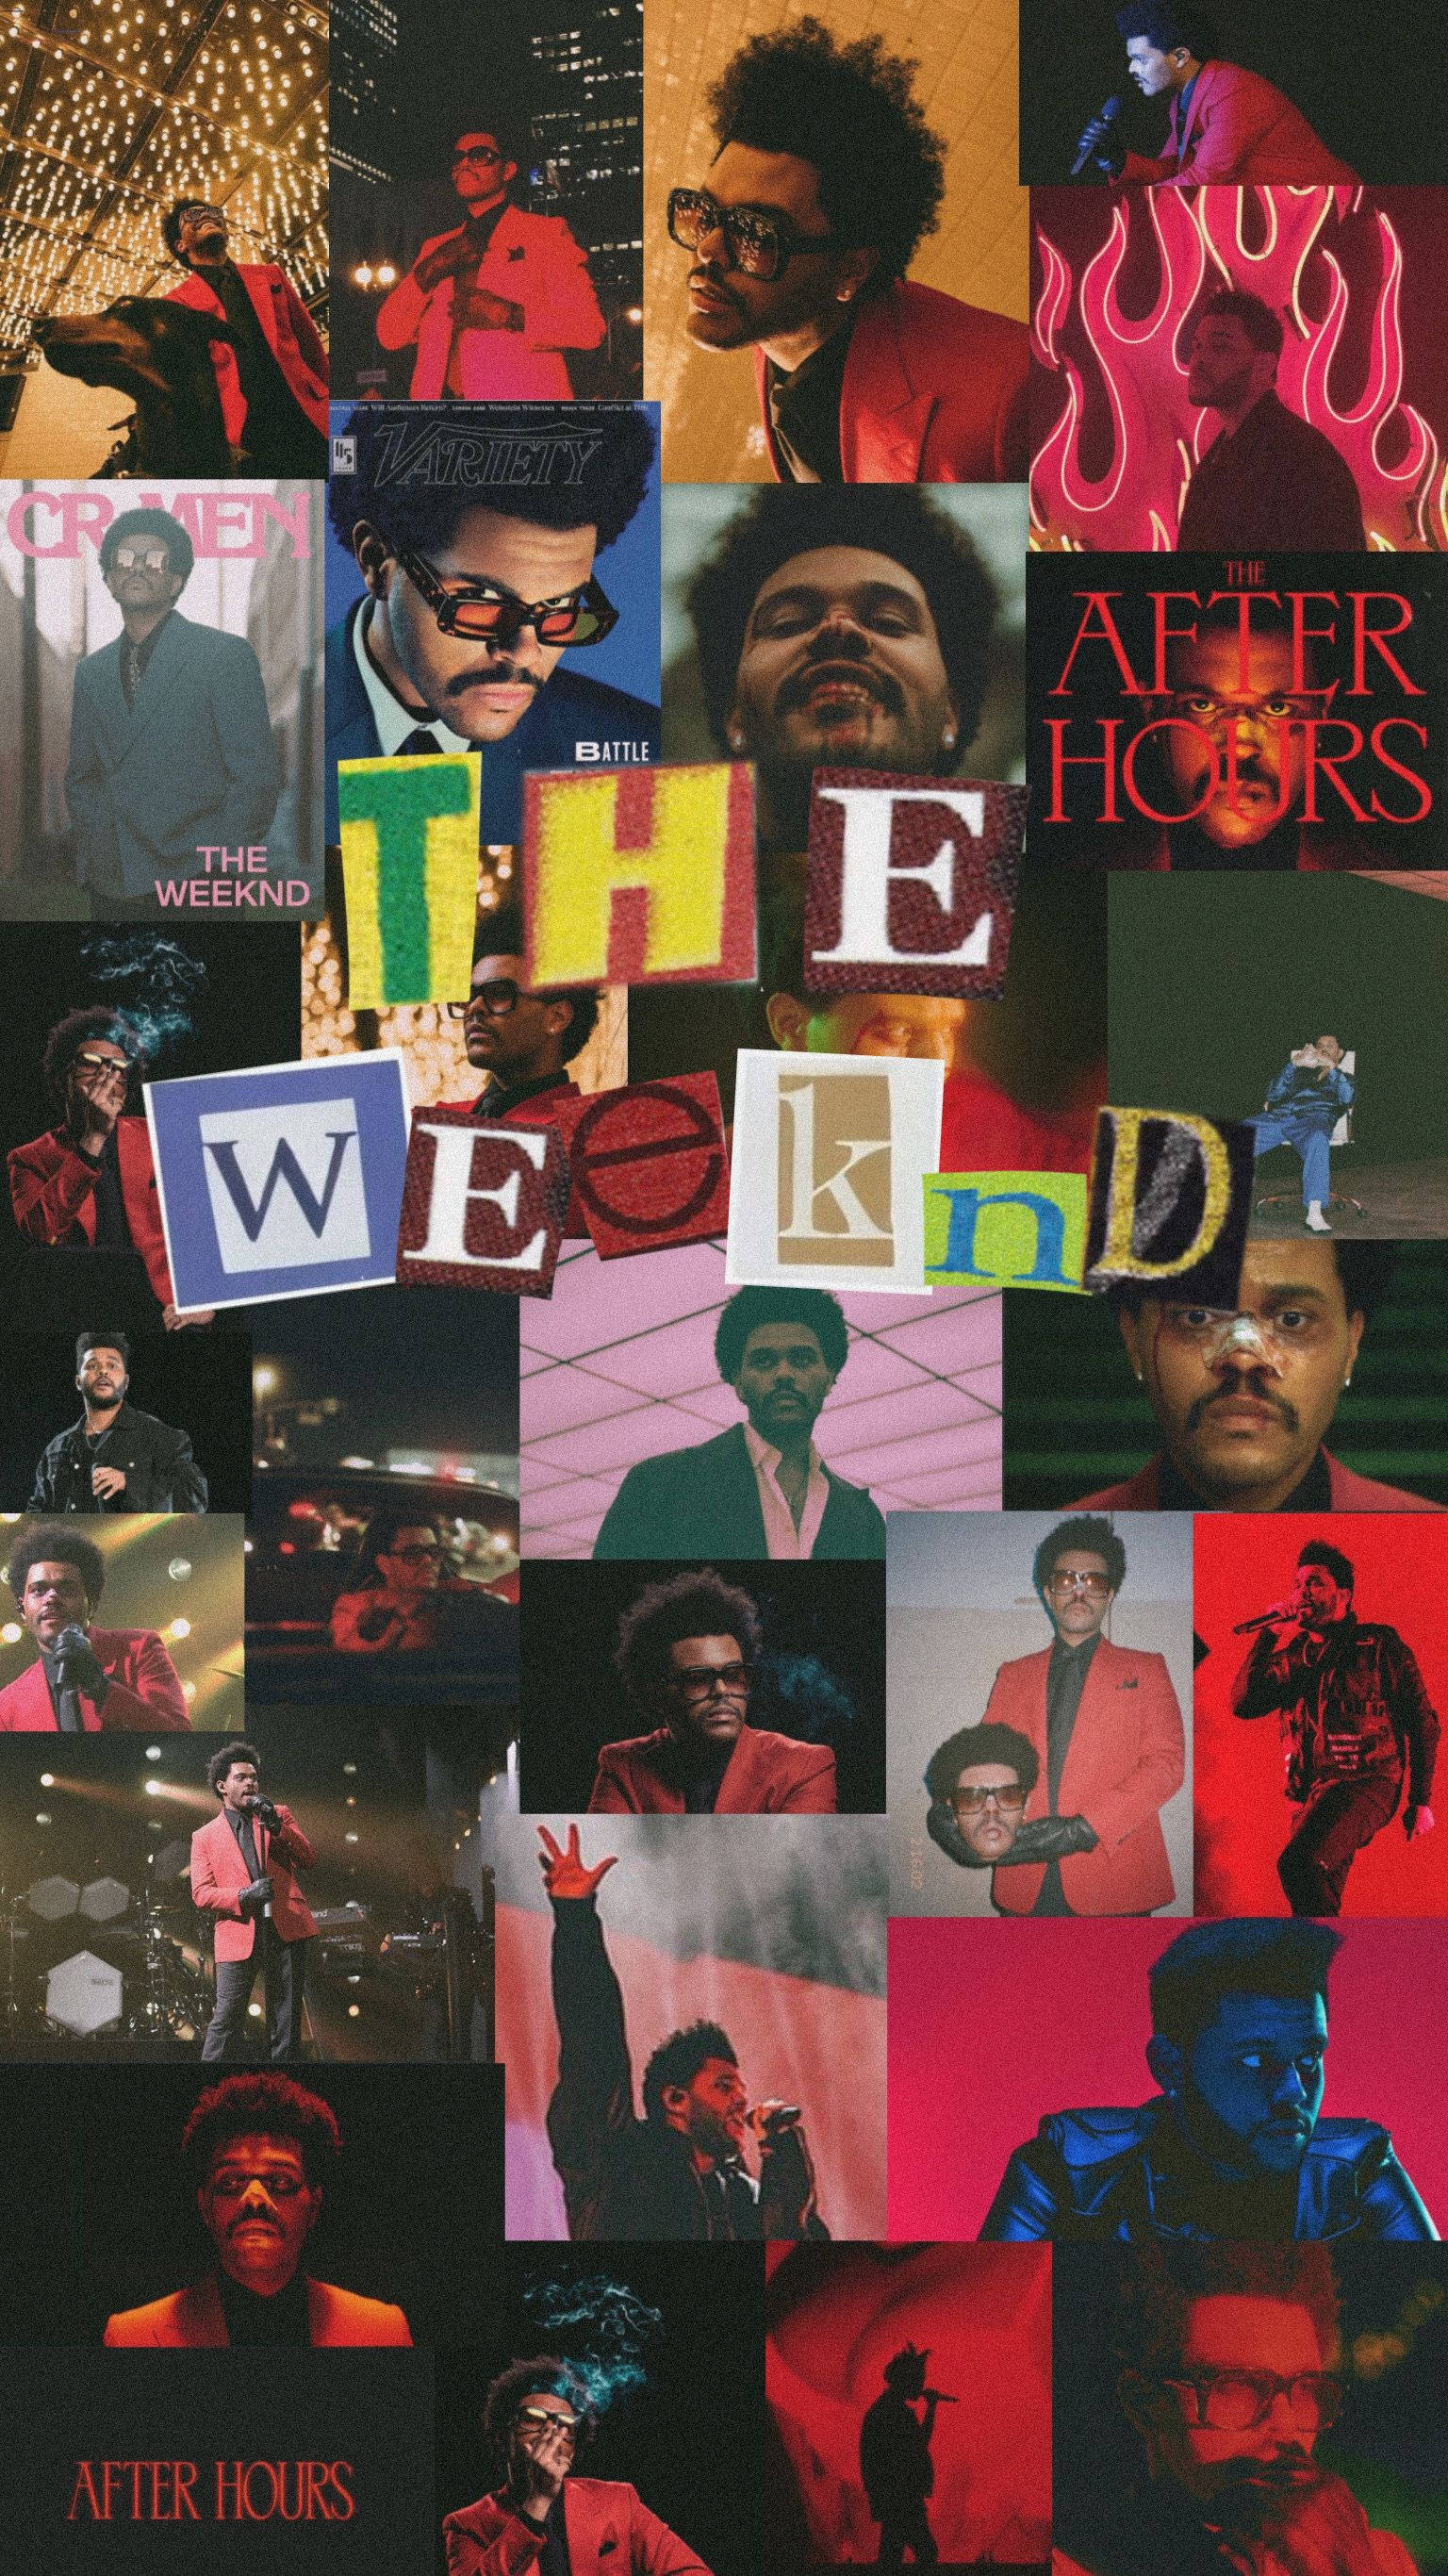 The Weeknd iPhone Wallpaper in 2020 | The weeknd wallpaper ... - The Weeknd